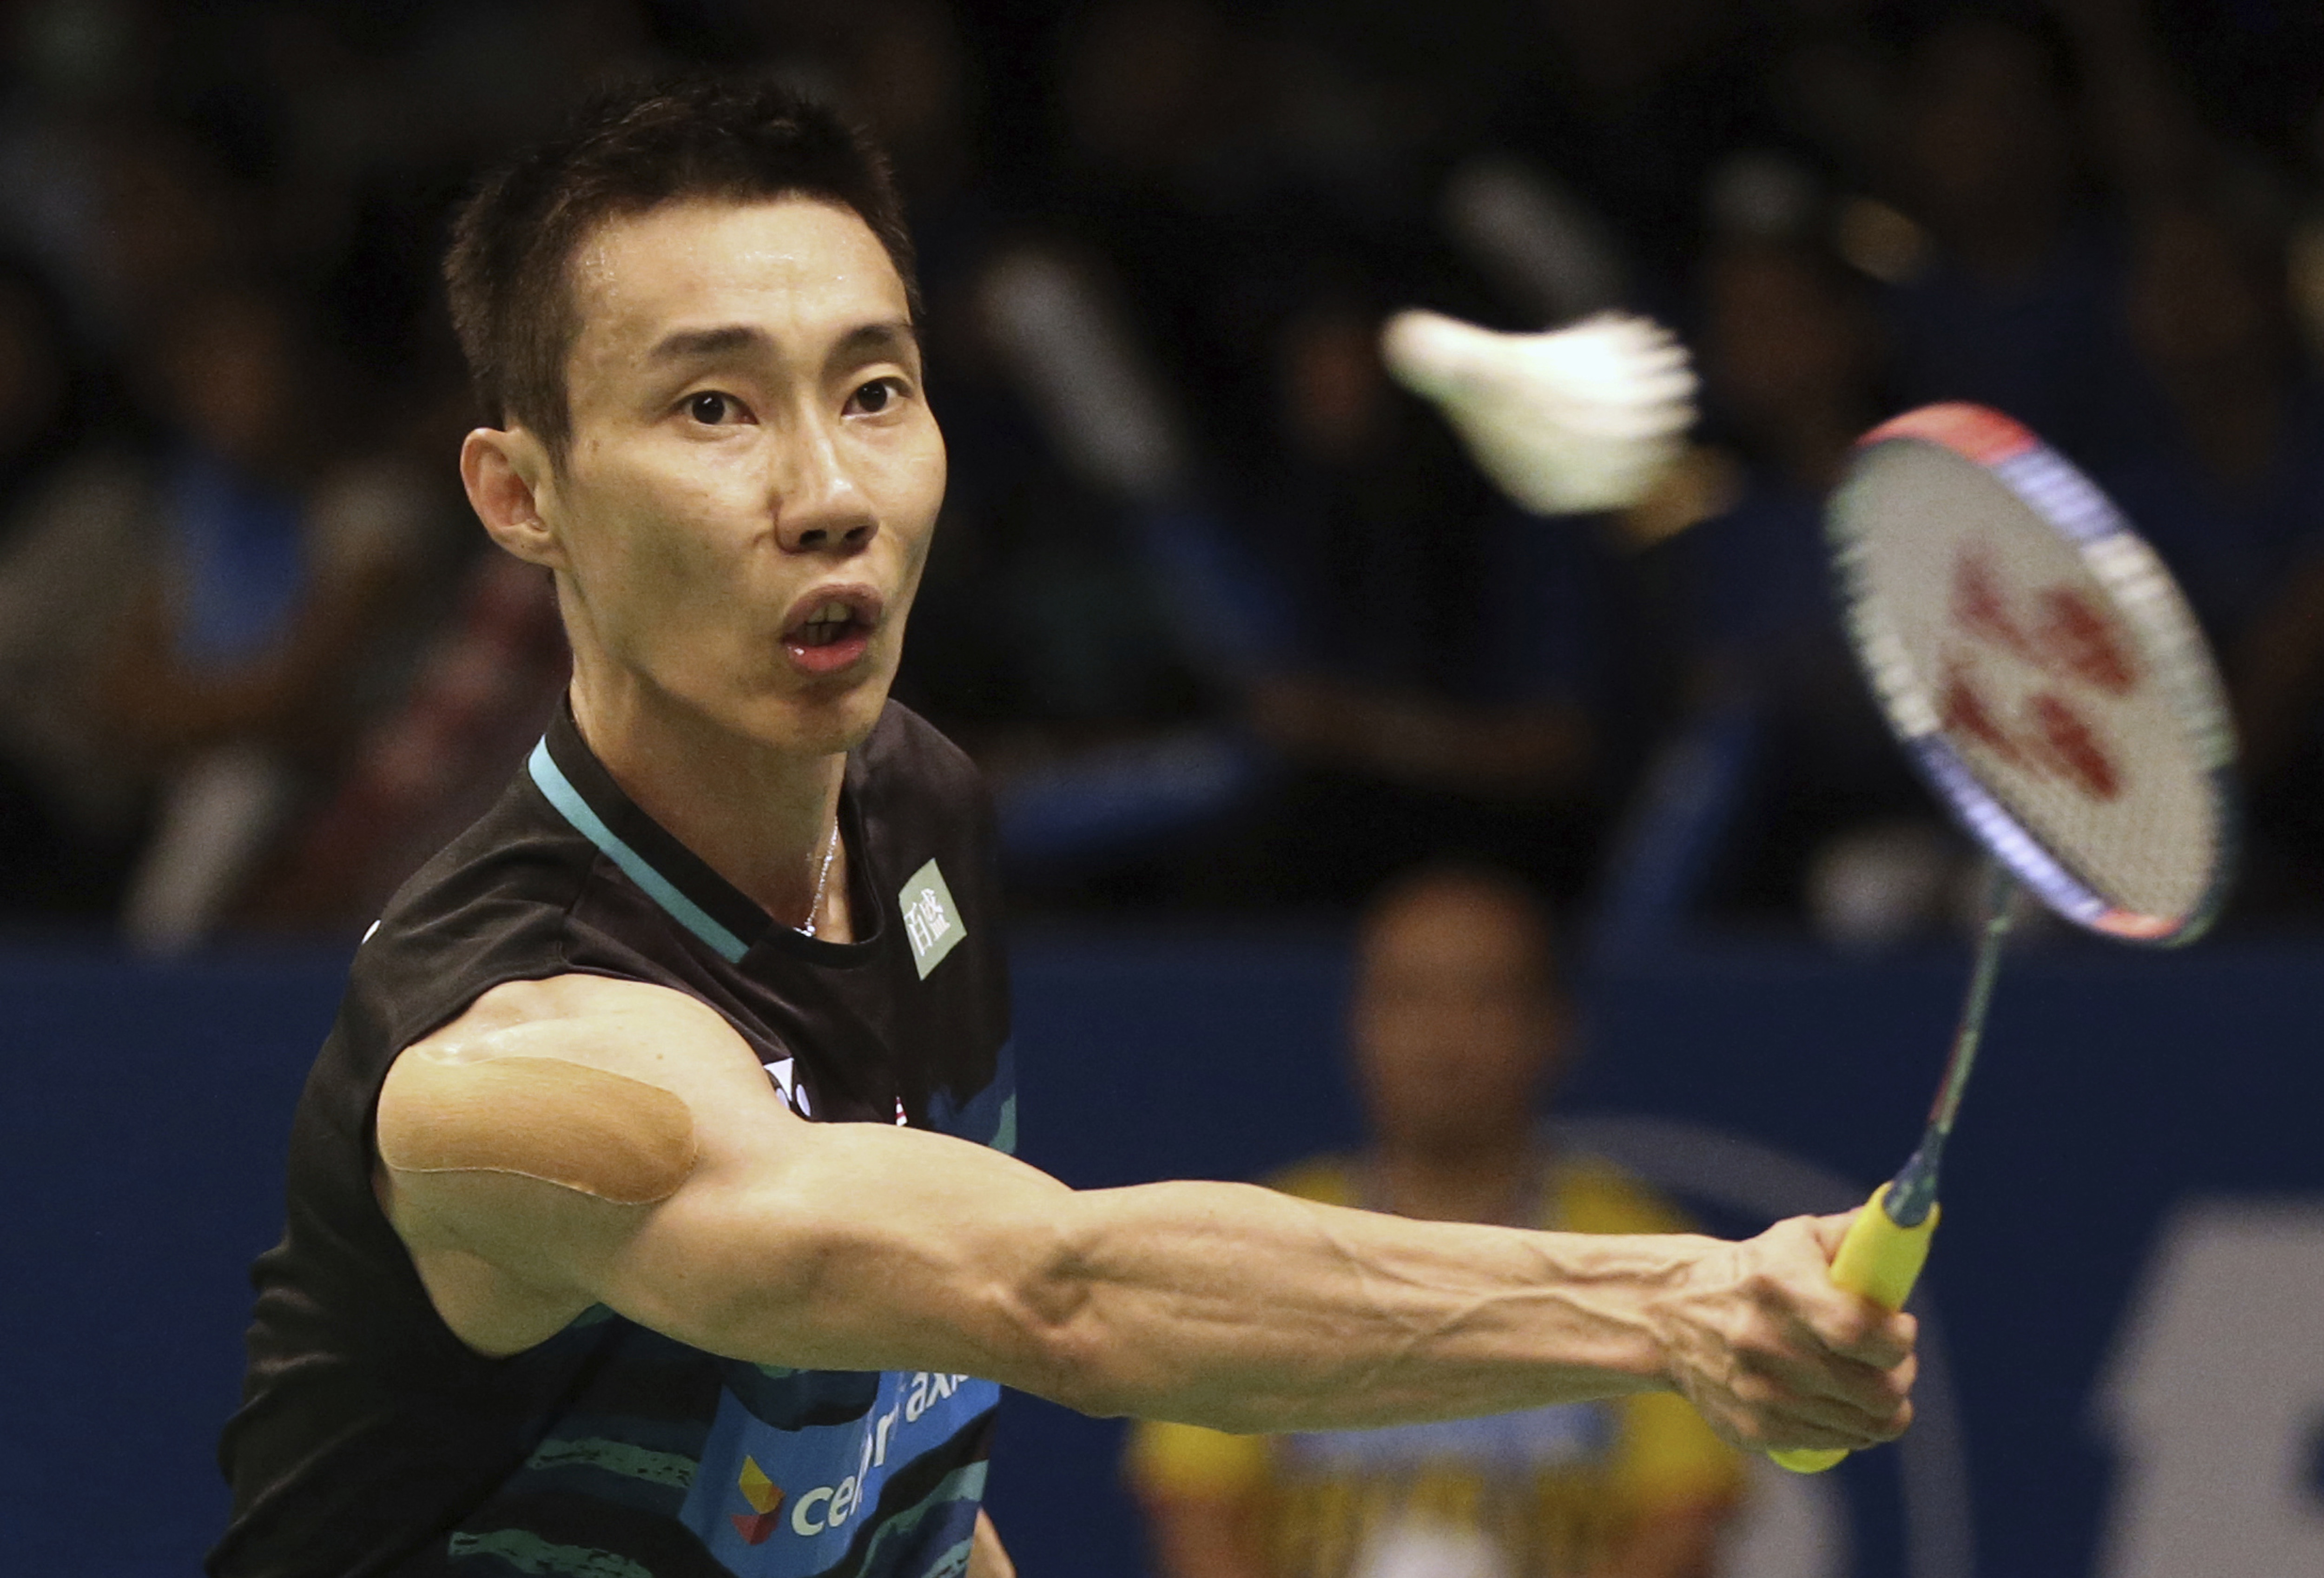 Malaysia's Lee Chong Wei returns the shuttlecock against India's HS Prannoy during the second round of Indonesia Open badminton championship in Jakarta, Indonesia, Thursday, June 15, 2017. (AP Photo/Dita Alangkara)